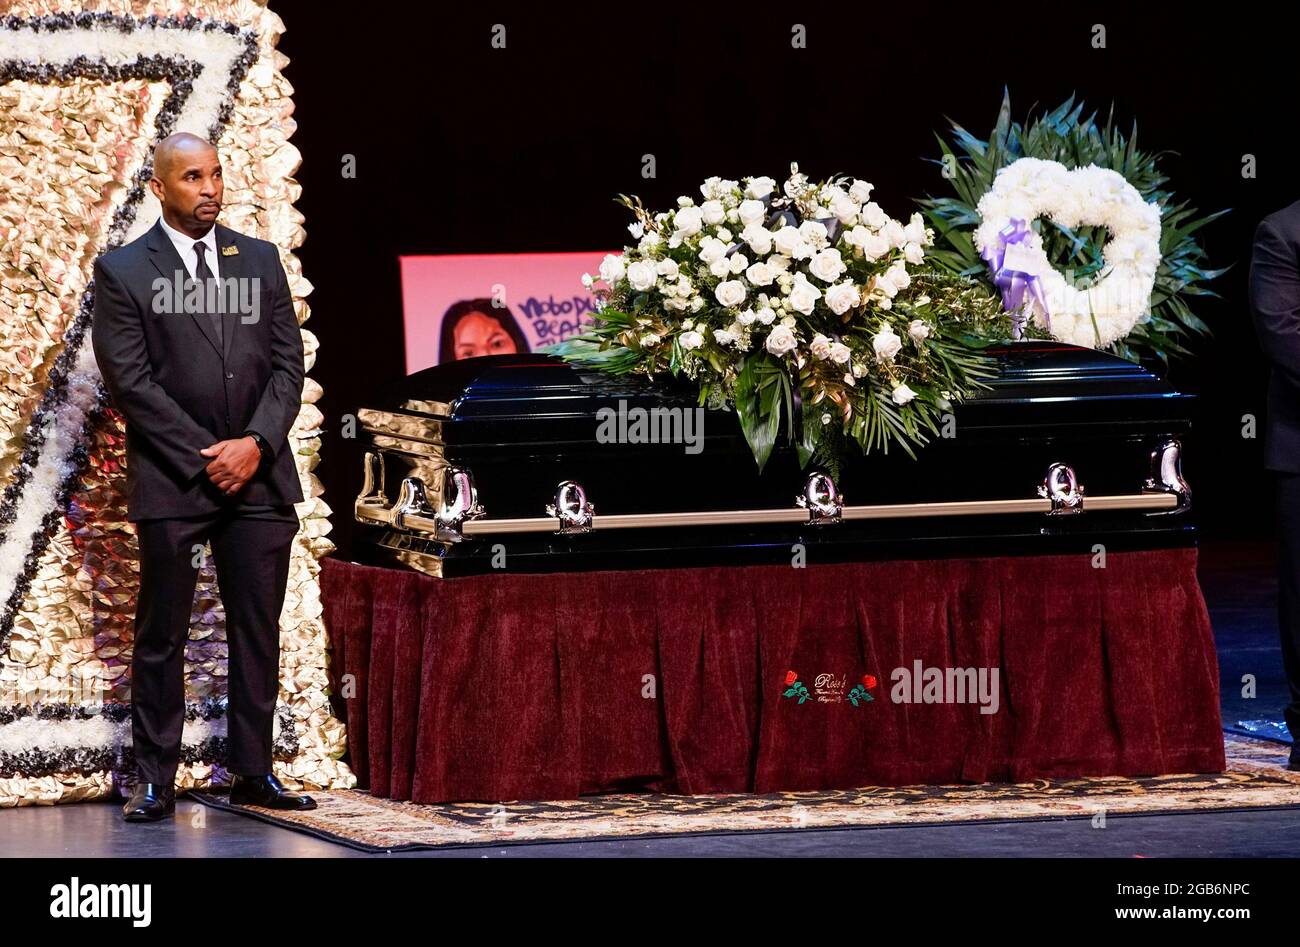 A man stands guard next to the casket for late rapper Marcel Theo Hall,  known by his stage name Biz Markie, during the funeral service in  Patchogue, New York, U.S., August 2,